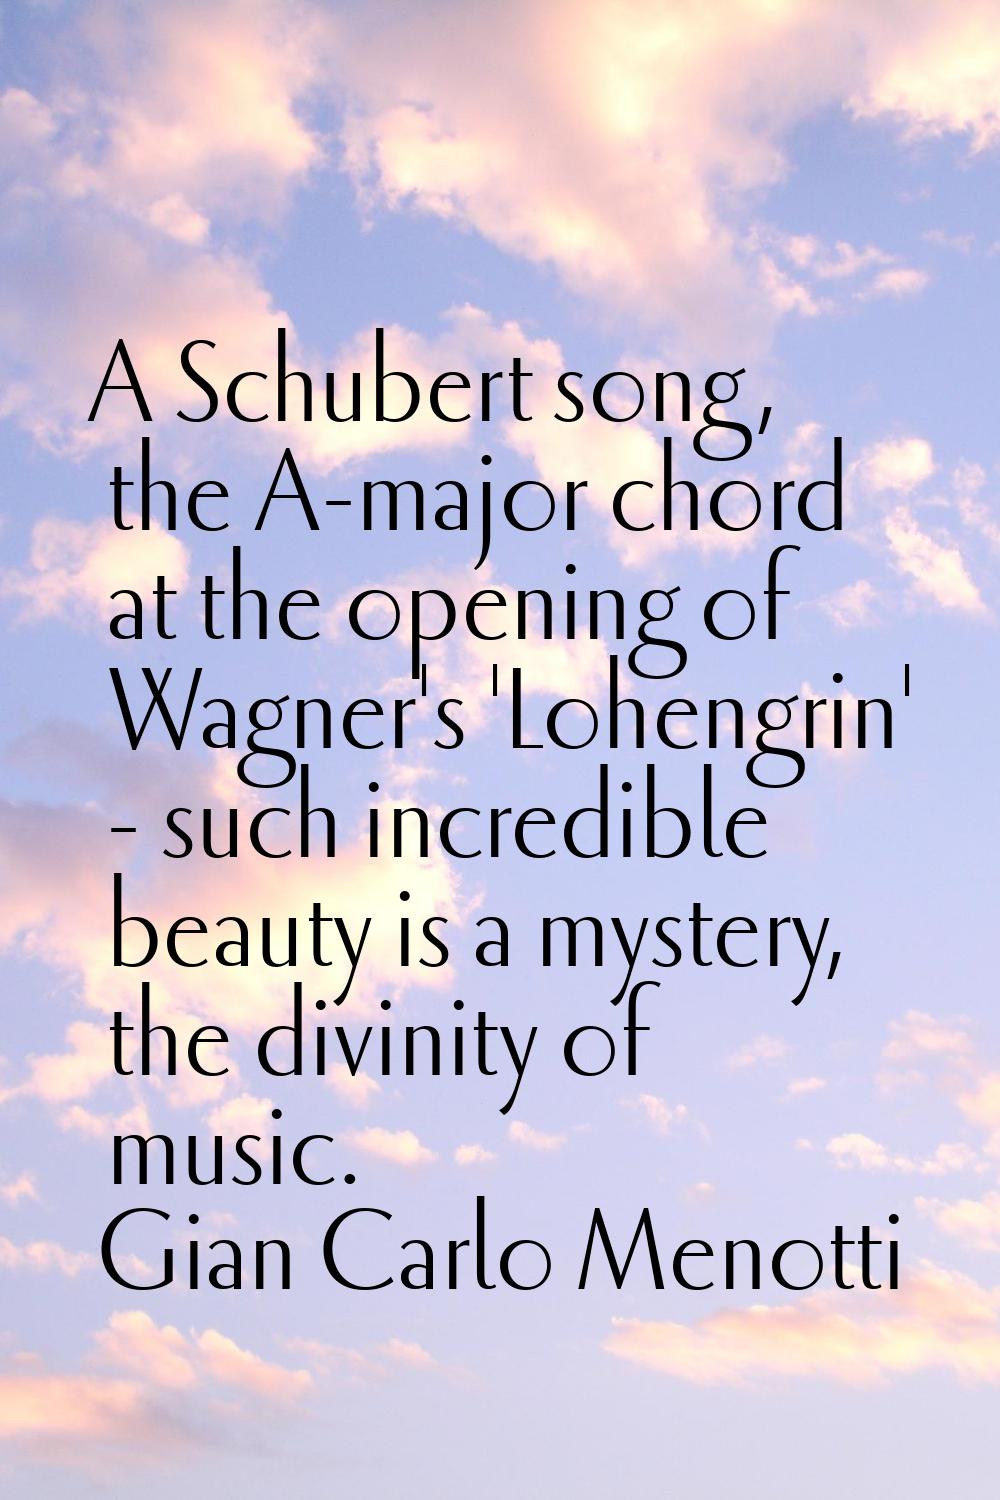 A Schubert song, the A-major chord at the opening of Wagner's 'Lohengrin' - such incredible beauty 